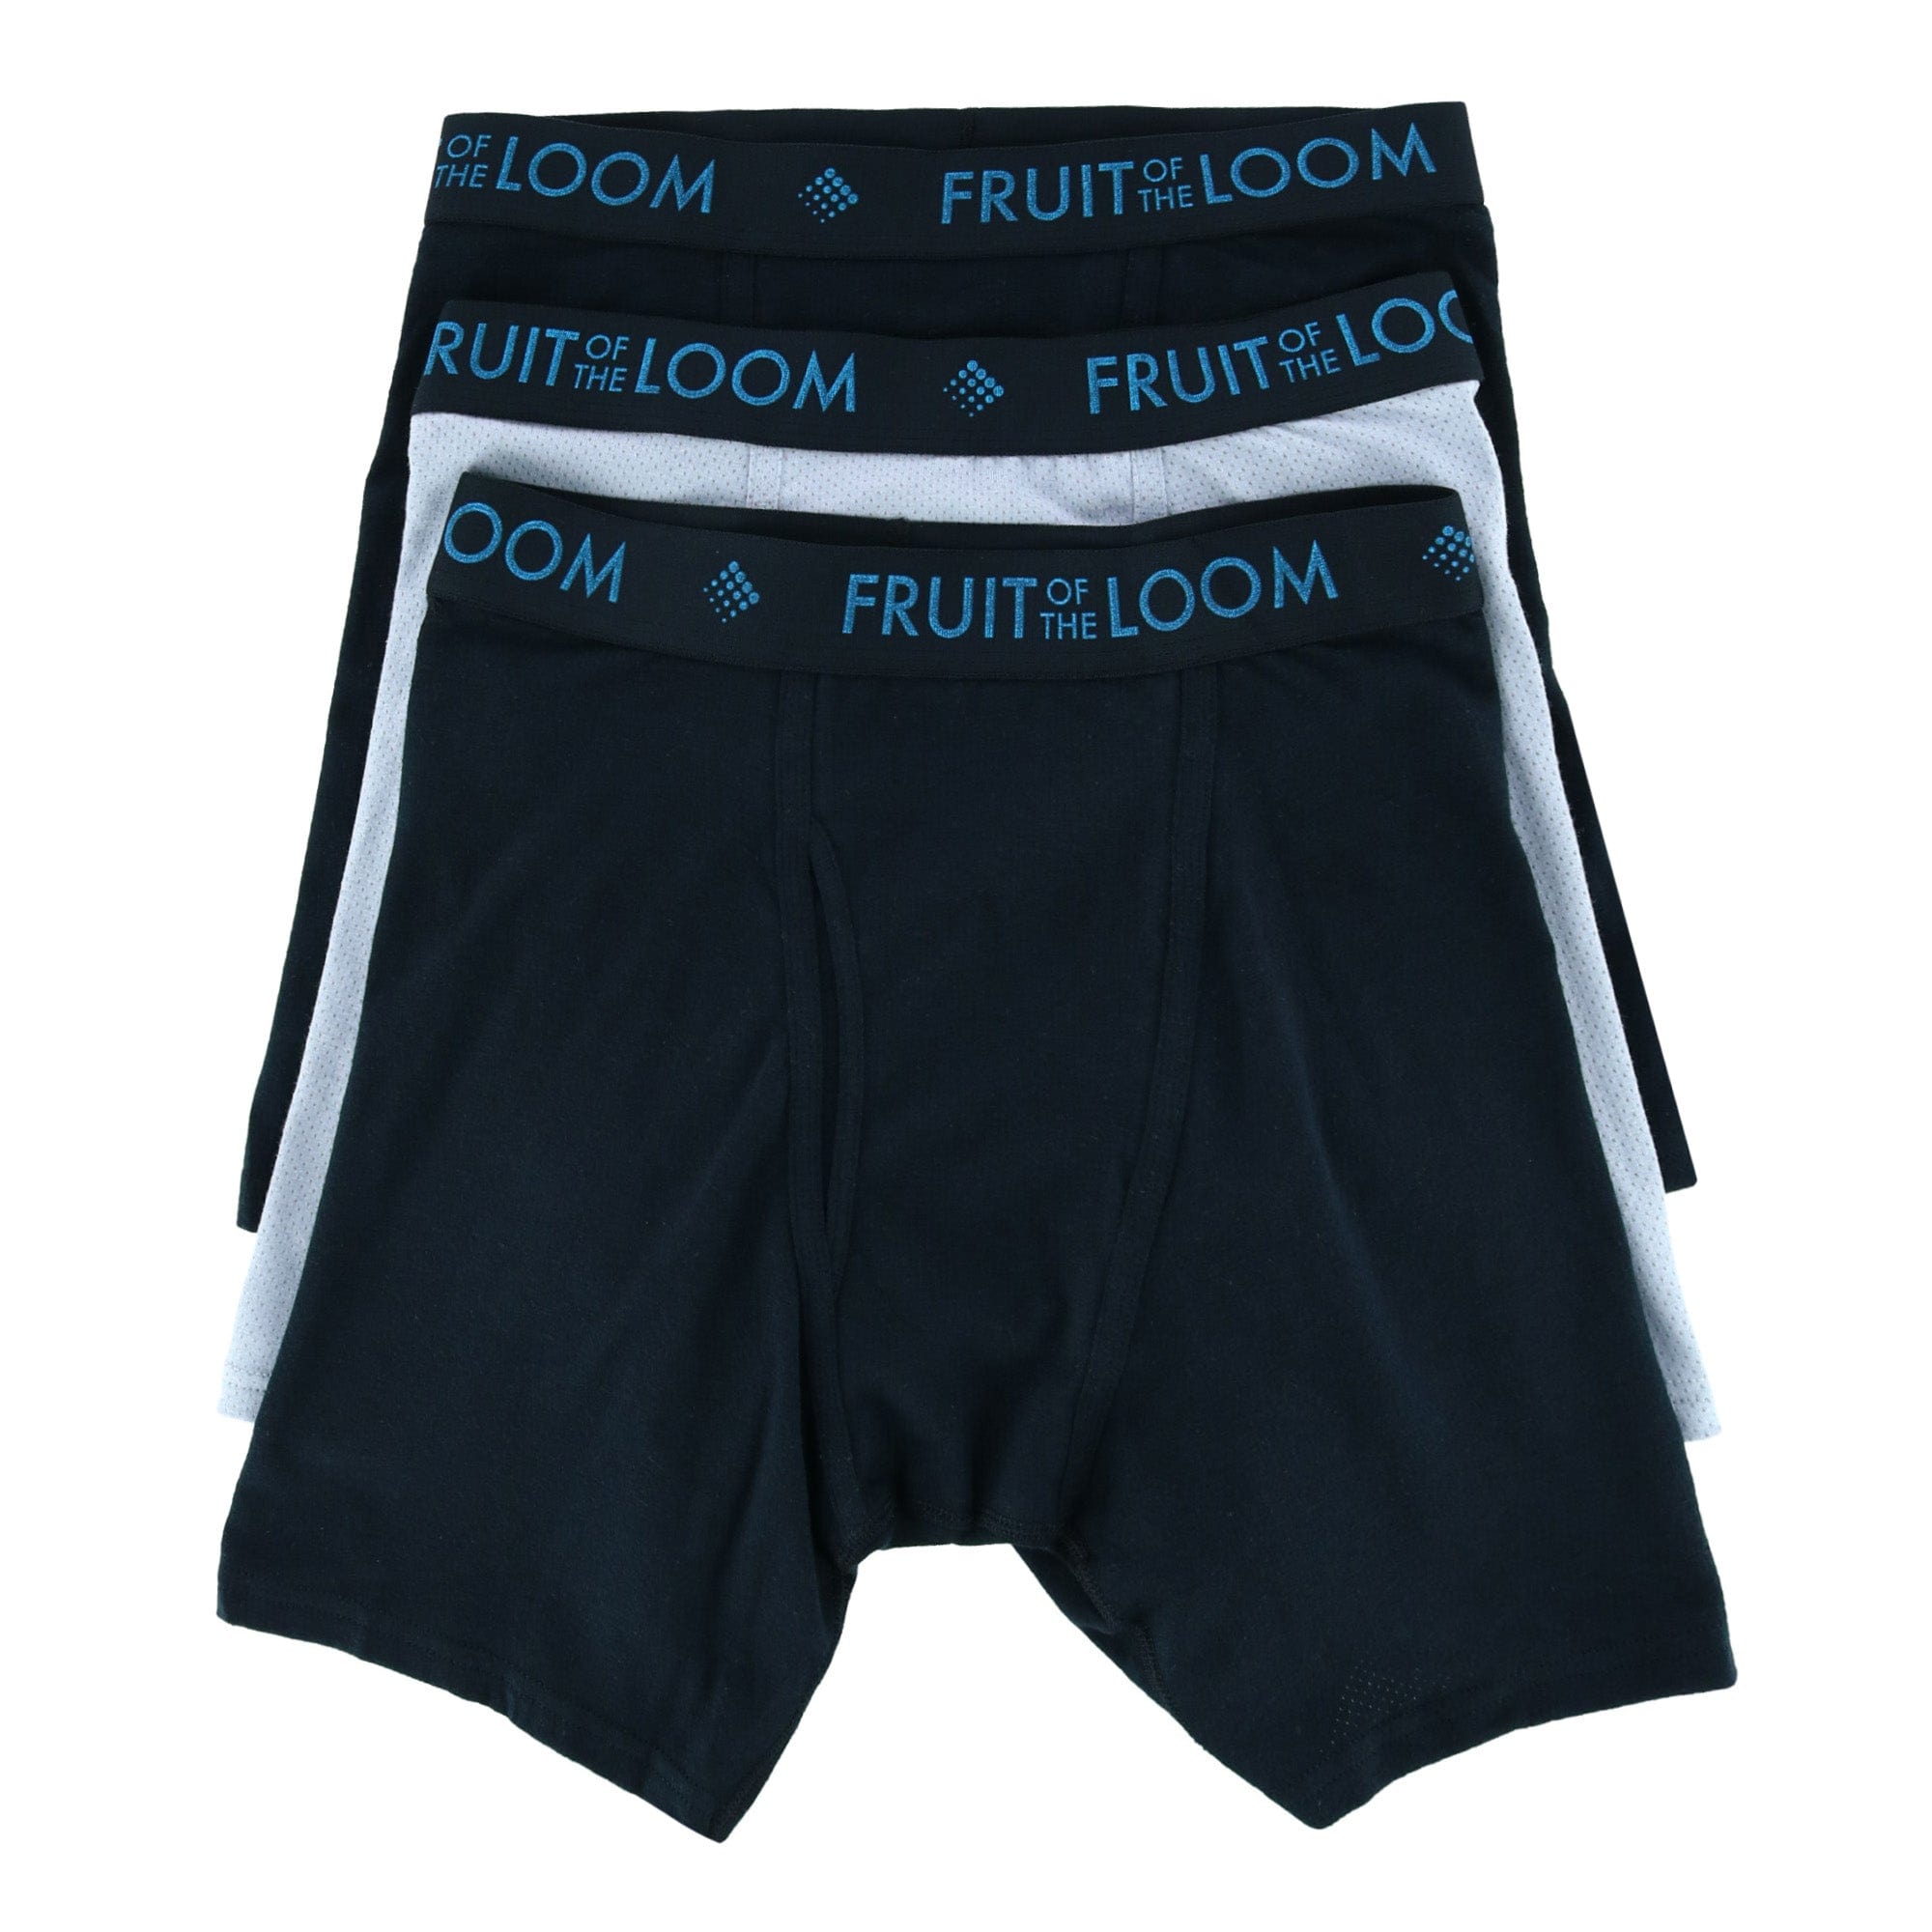 Fruit of the Loom Boys' Breathable Cotton Mesh Boxer Brief, 4-Pack